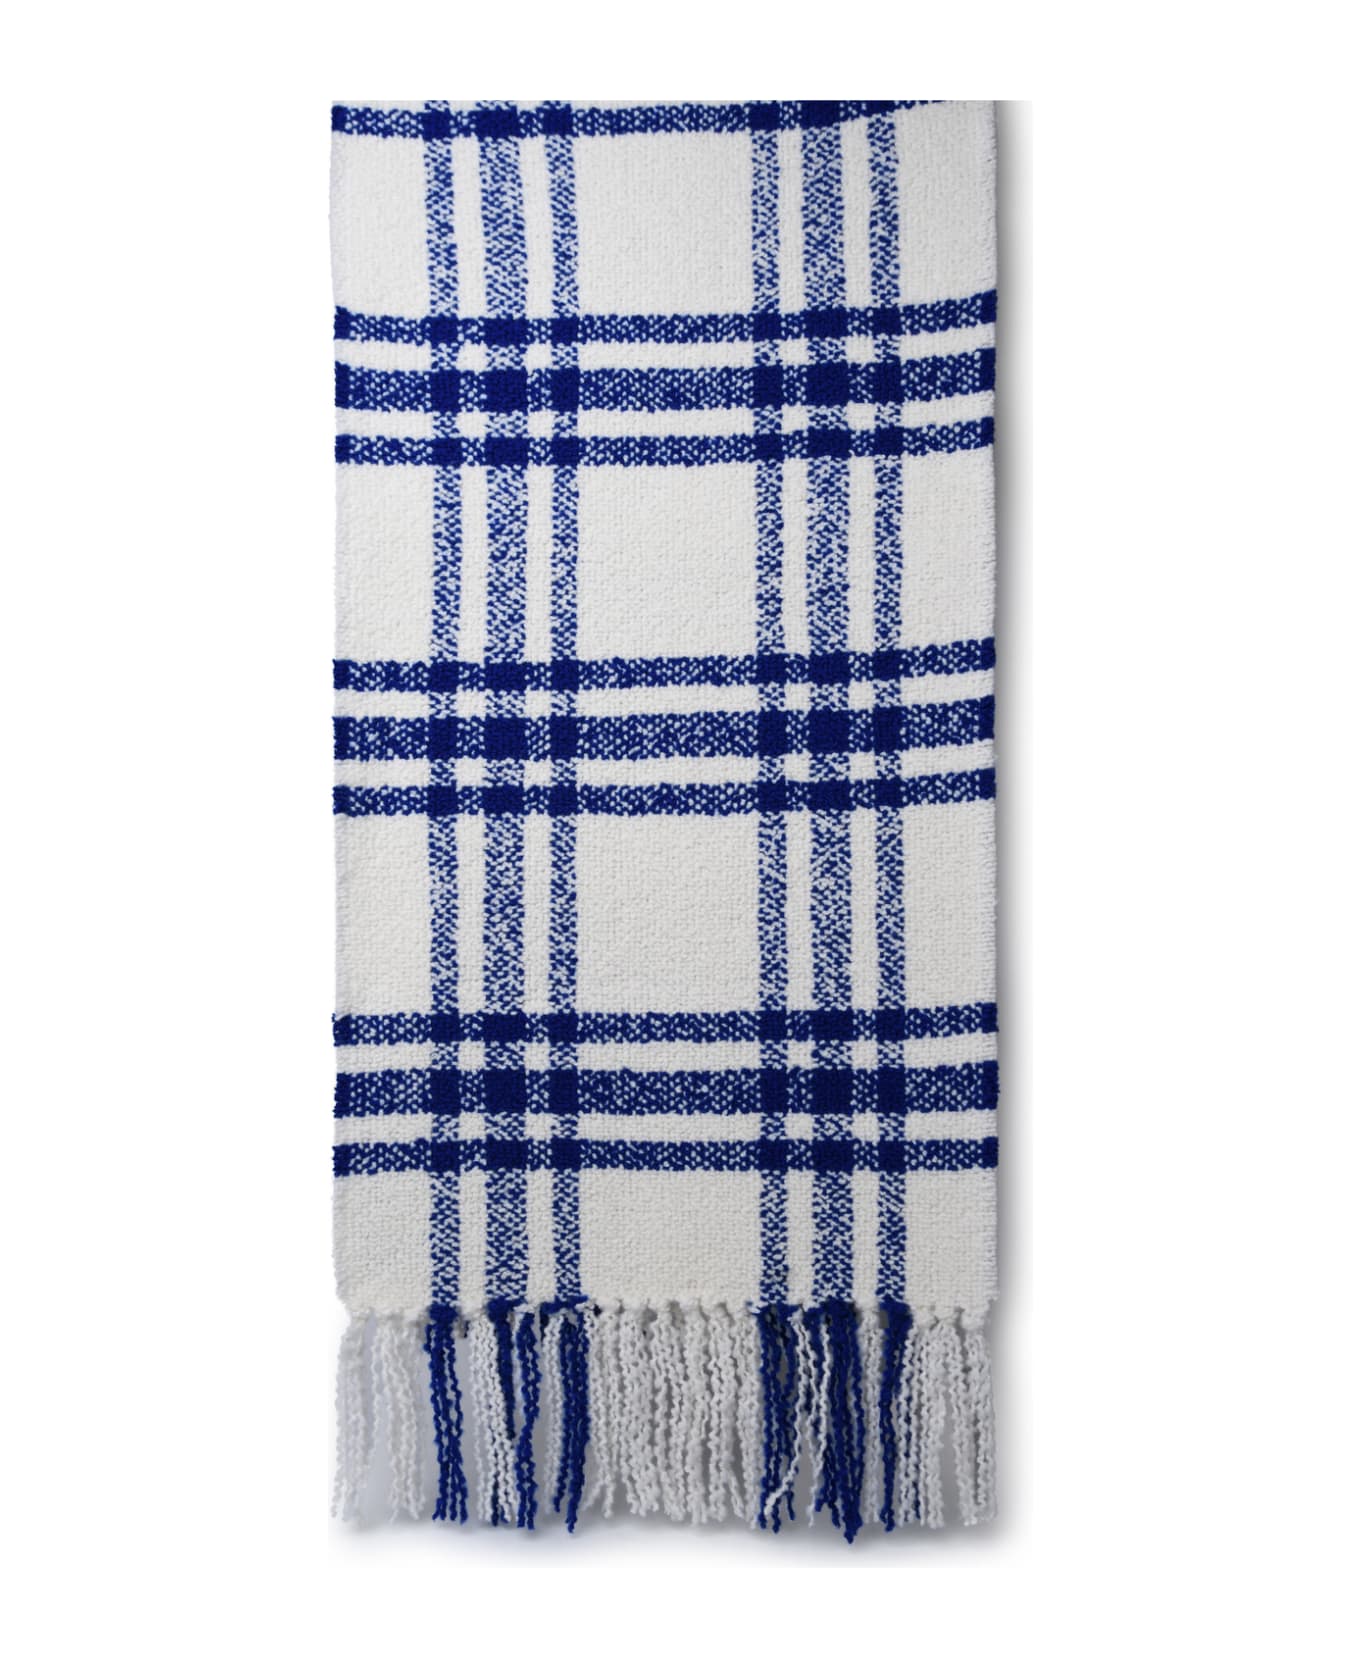 Burberry Brushed Wool Scarf - Blue